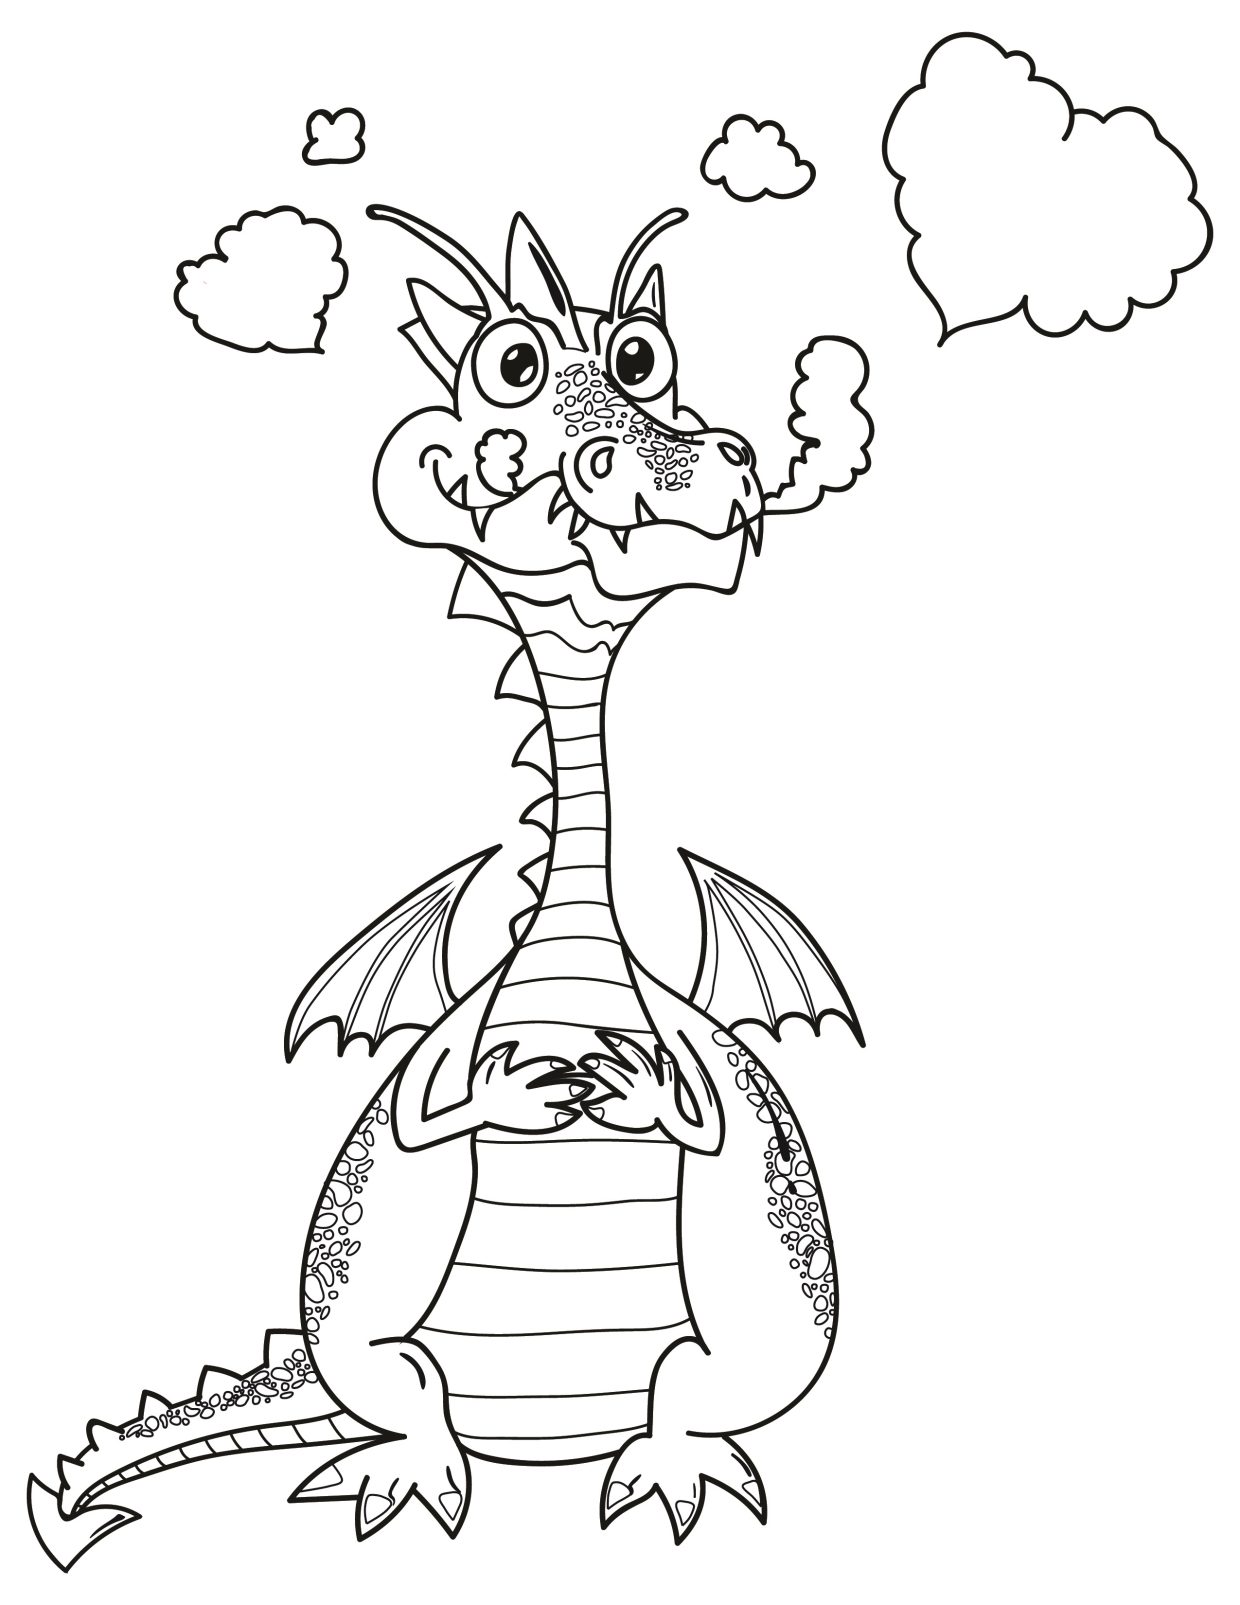 Puff the Magic Dragon Coloring Pages 1